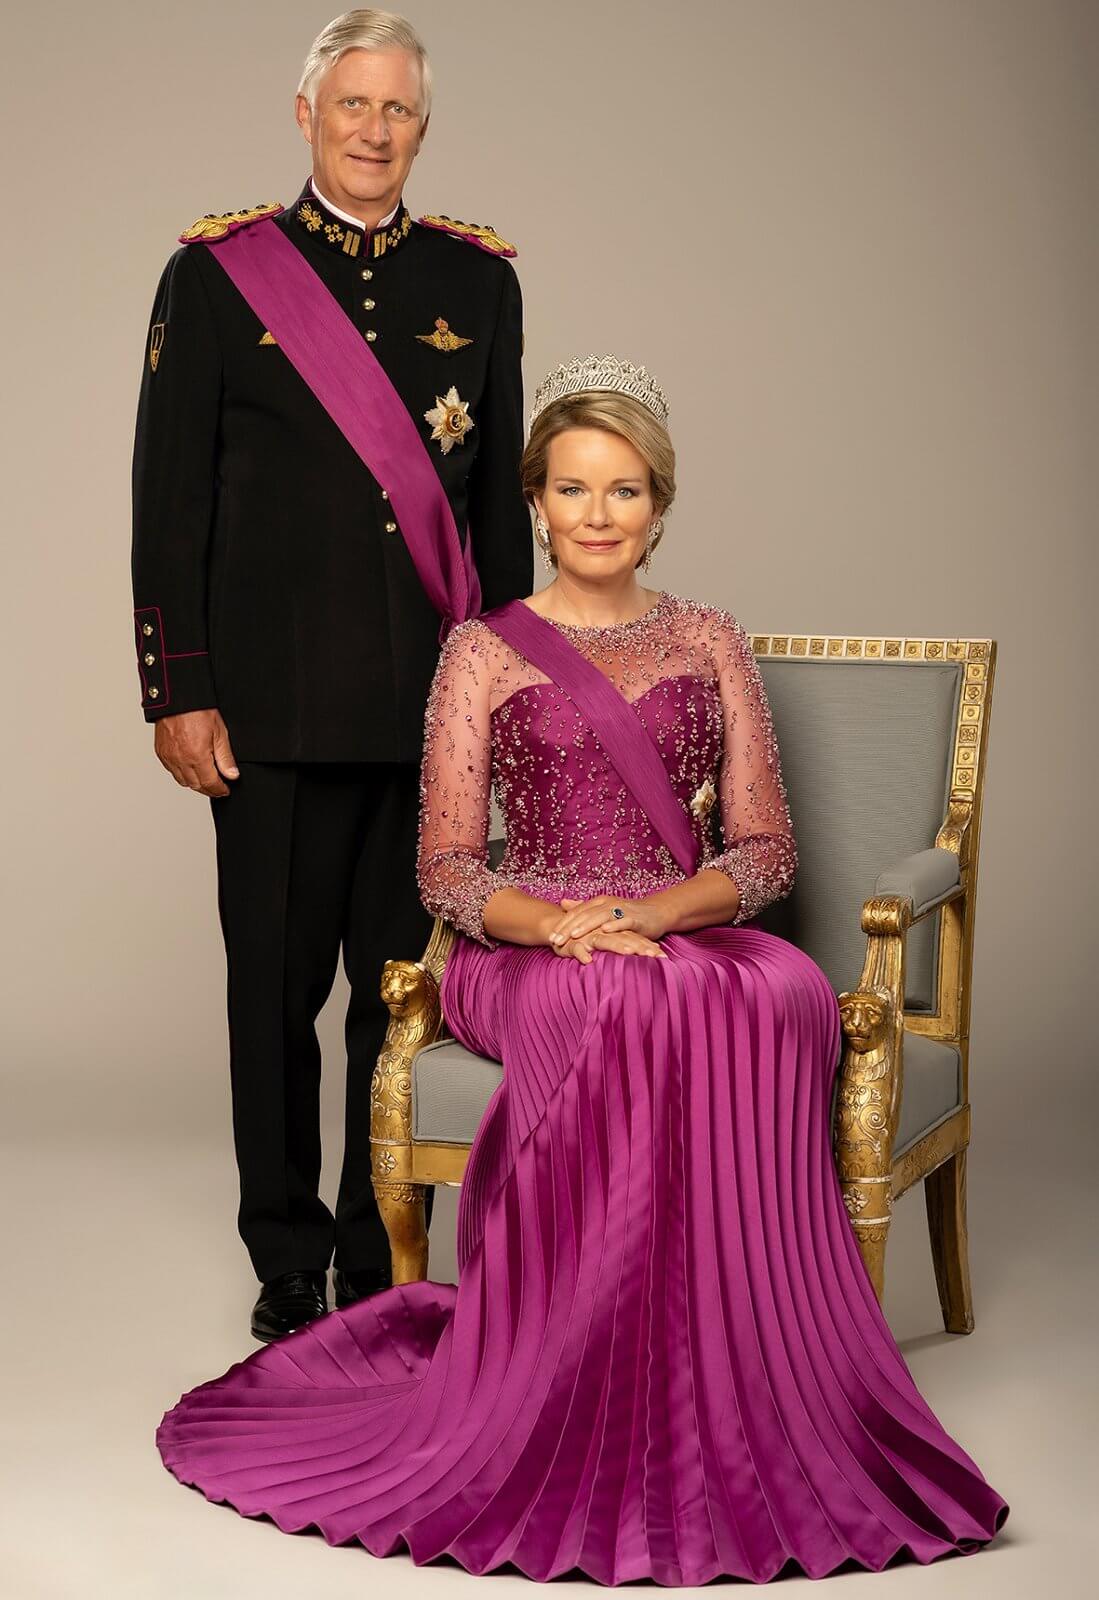 New official photos of Belgium's King and Queen have been released